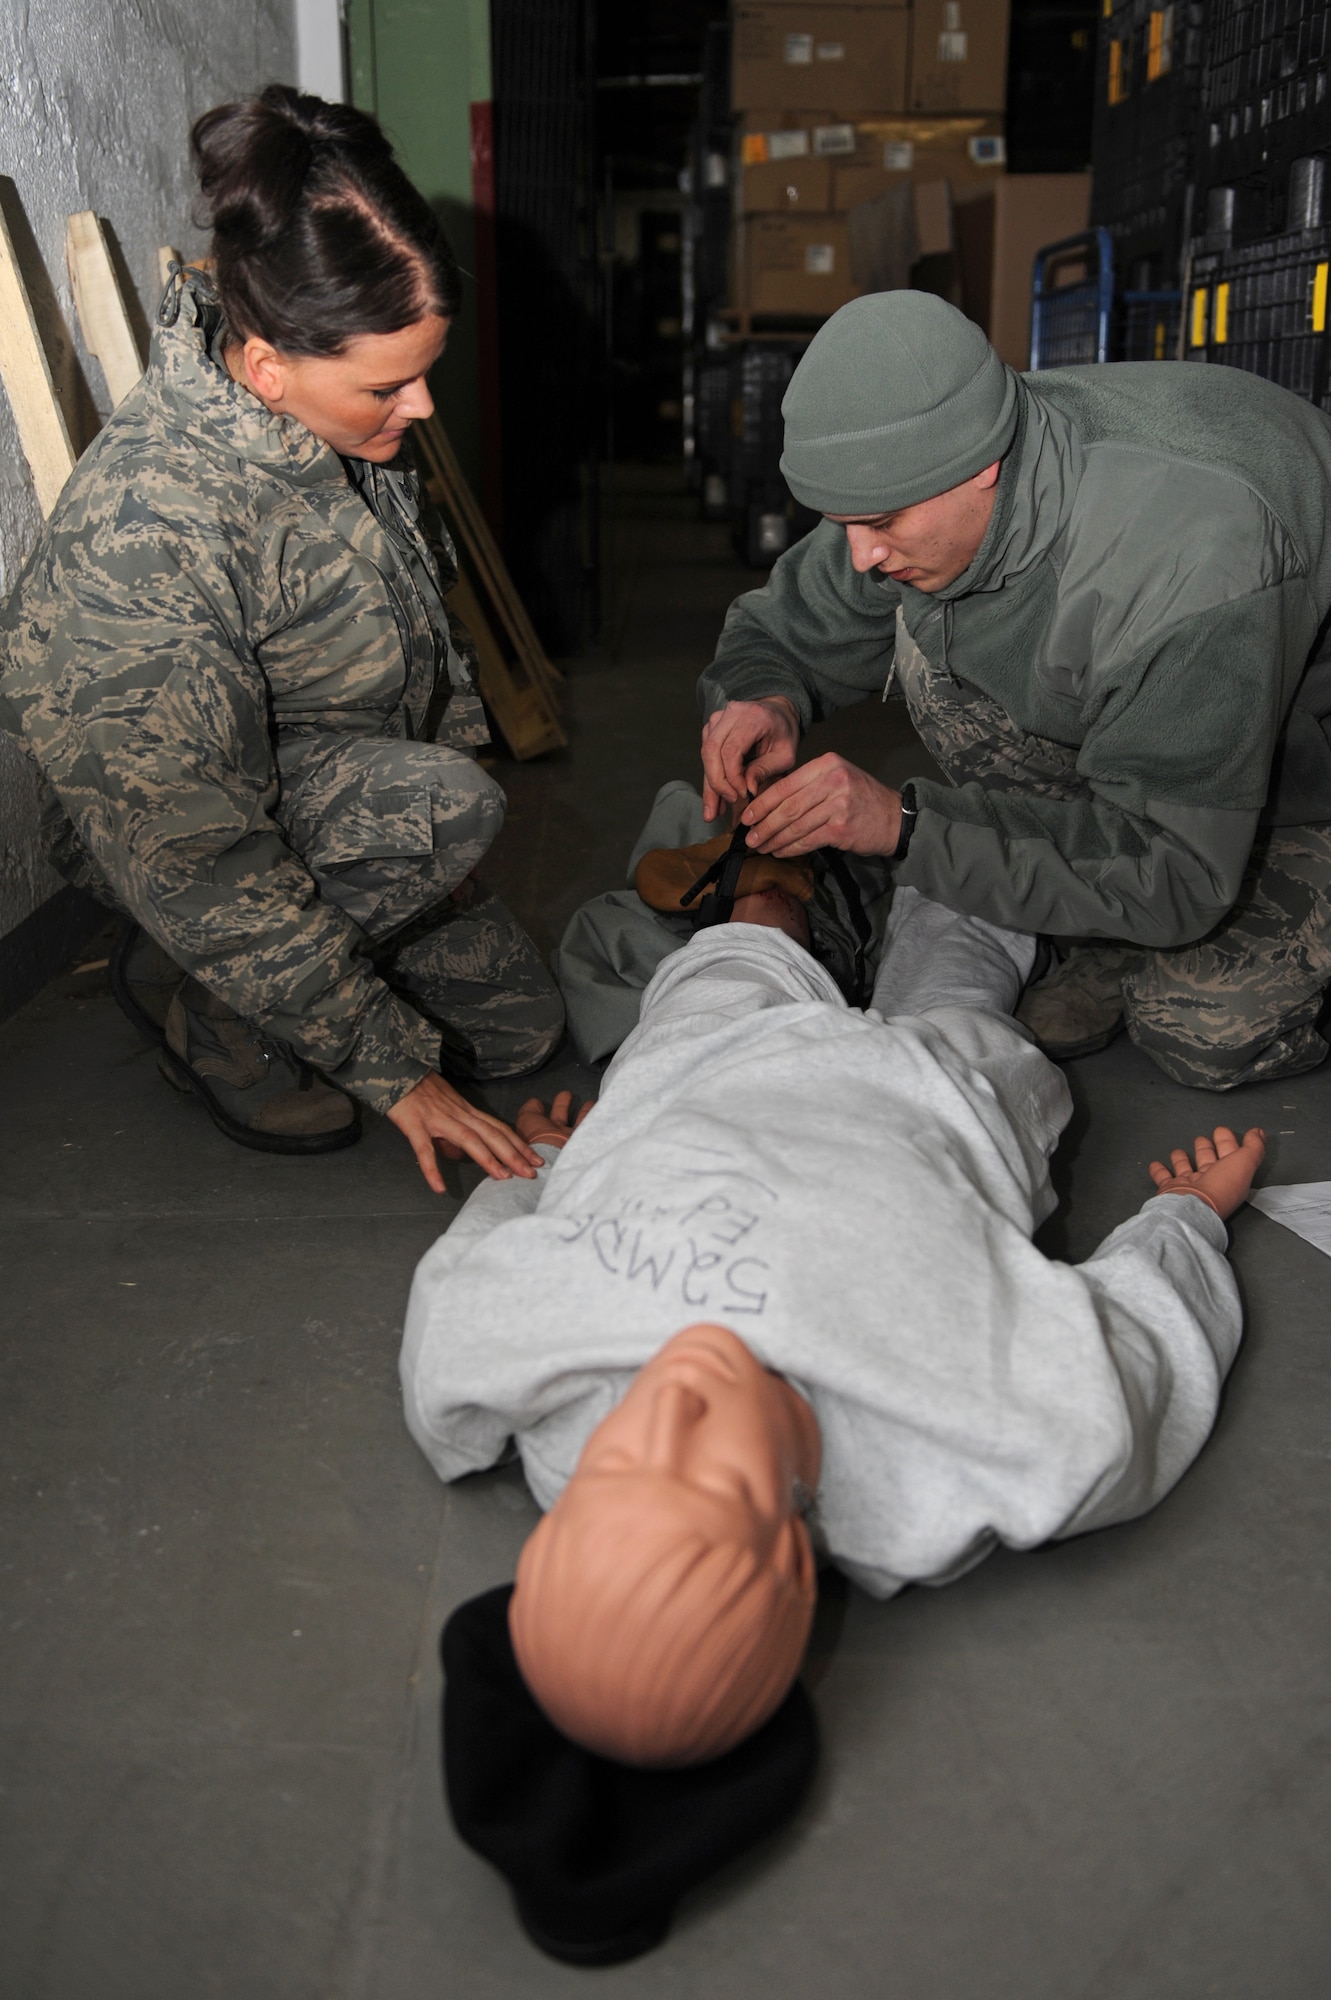 SPANGDAHLEM AIR BASE, Germany – Tech. Sgt. Ronna Cabello, left, and Airman 1st Class Ross Konicke, 52nd Aerospace Medicine Squadron field response team members, treat a mock victim for injuries during an active-shooter training exercise at Bldg. 103 here Feb. 17. The 52nd Fighter Wing conducted the exercise to test the wing’s response to an active-shooter situation. Training like this readies the base to respond to real emergency events protecting base members and U.S. government assets. (U.S. Air Force photo by Airman 1st Class Matthew B. Fredericks/Released)